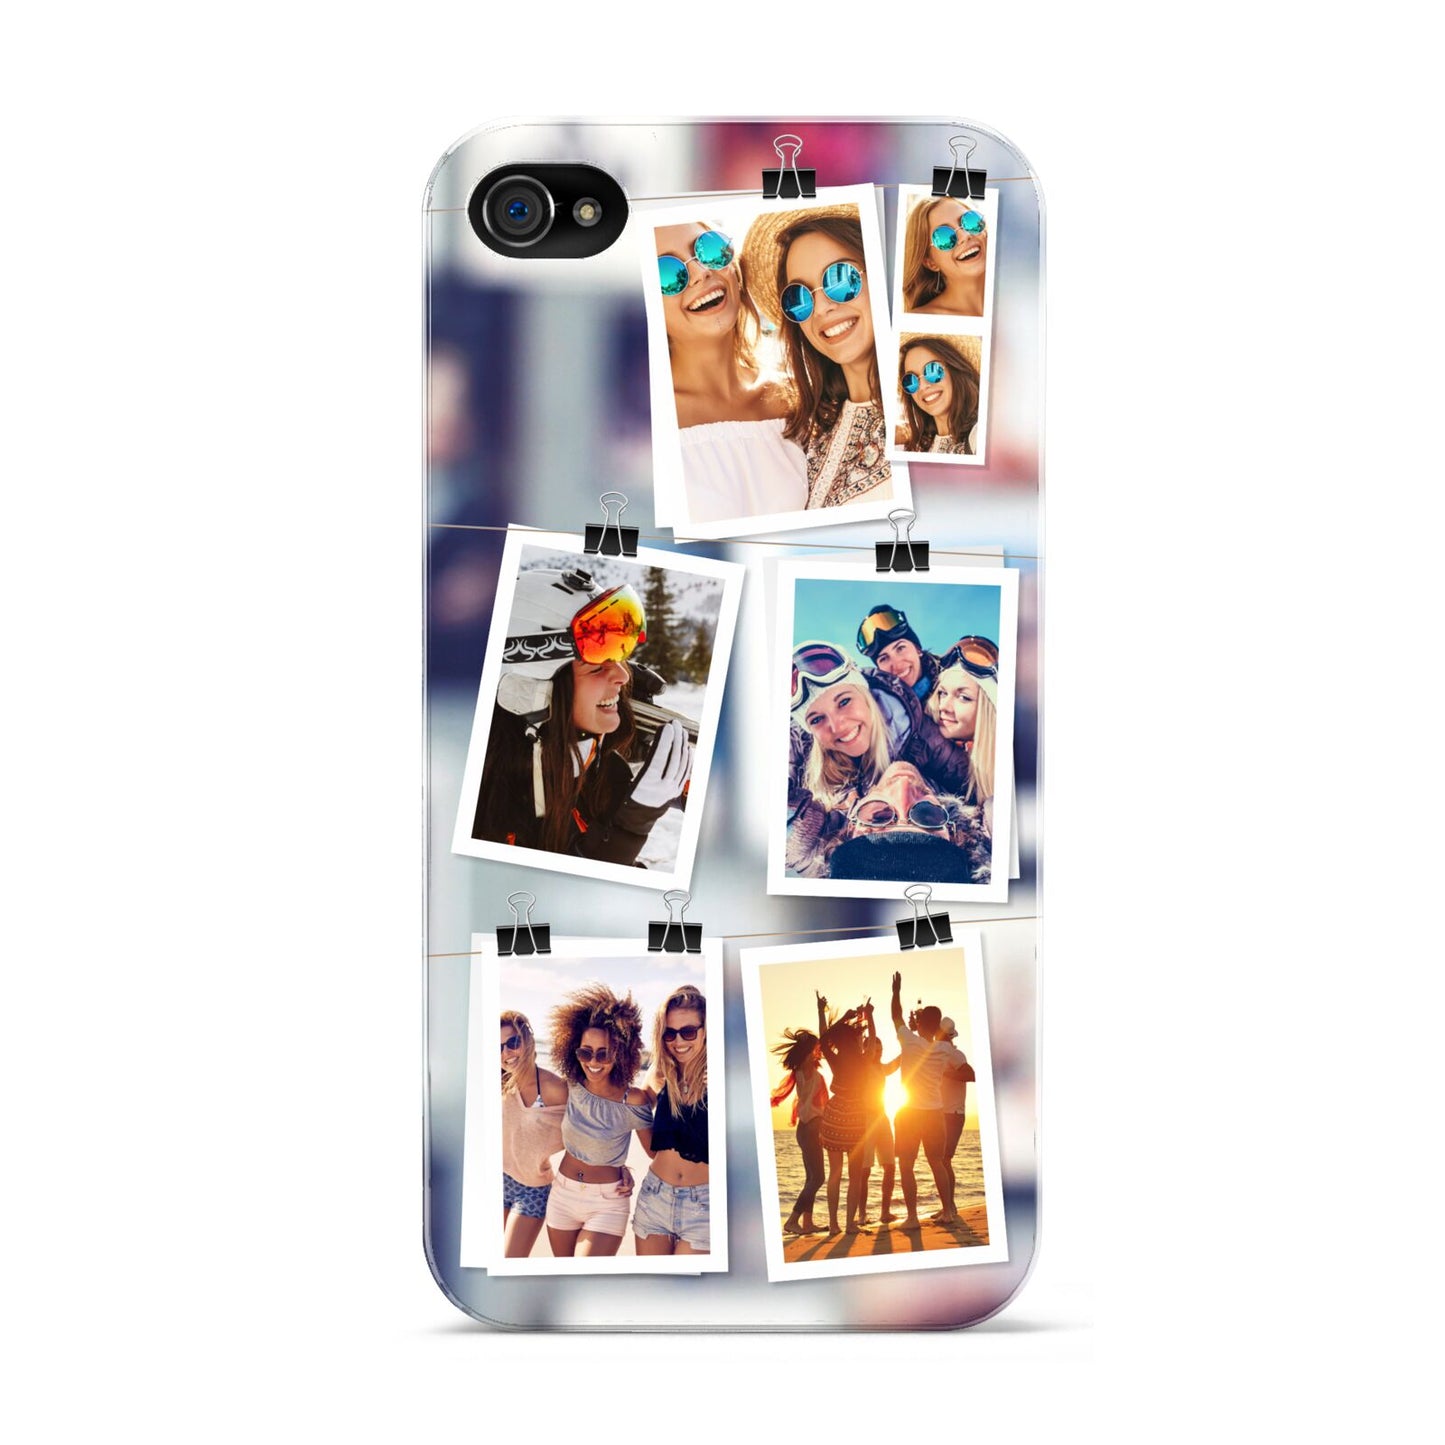 Photo Wall Montage Upload Apple iPhone 4s Case